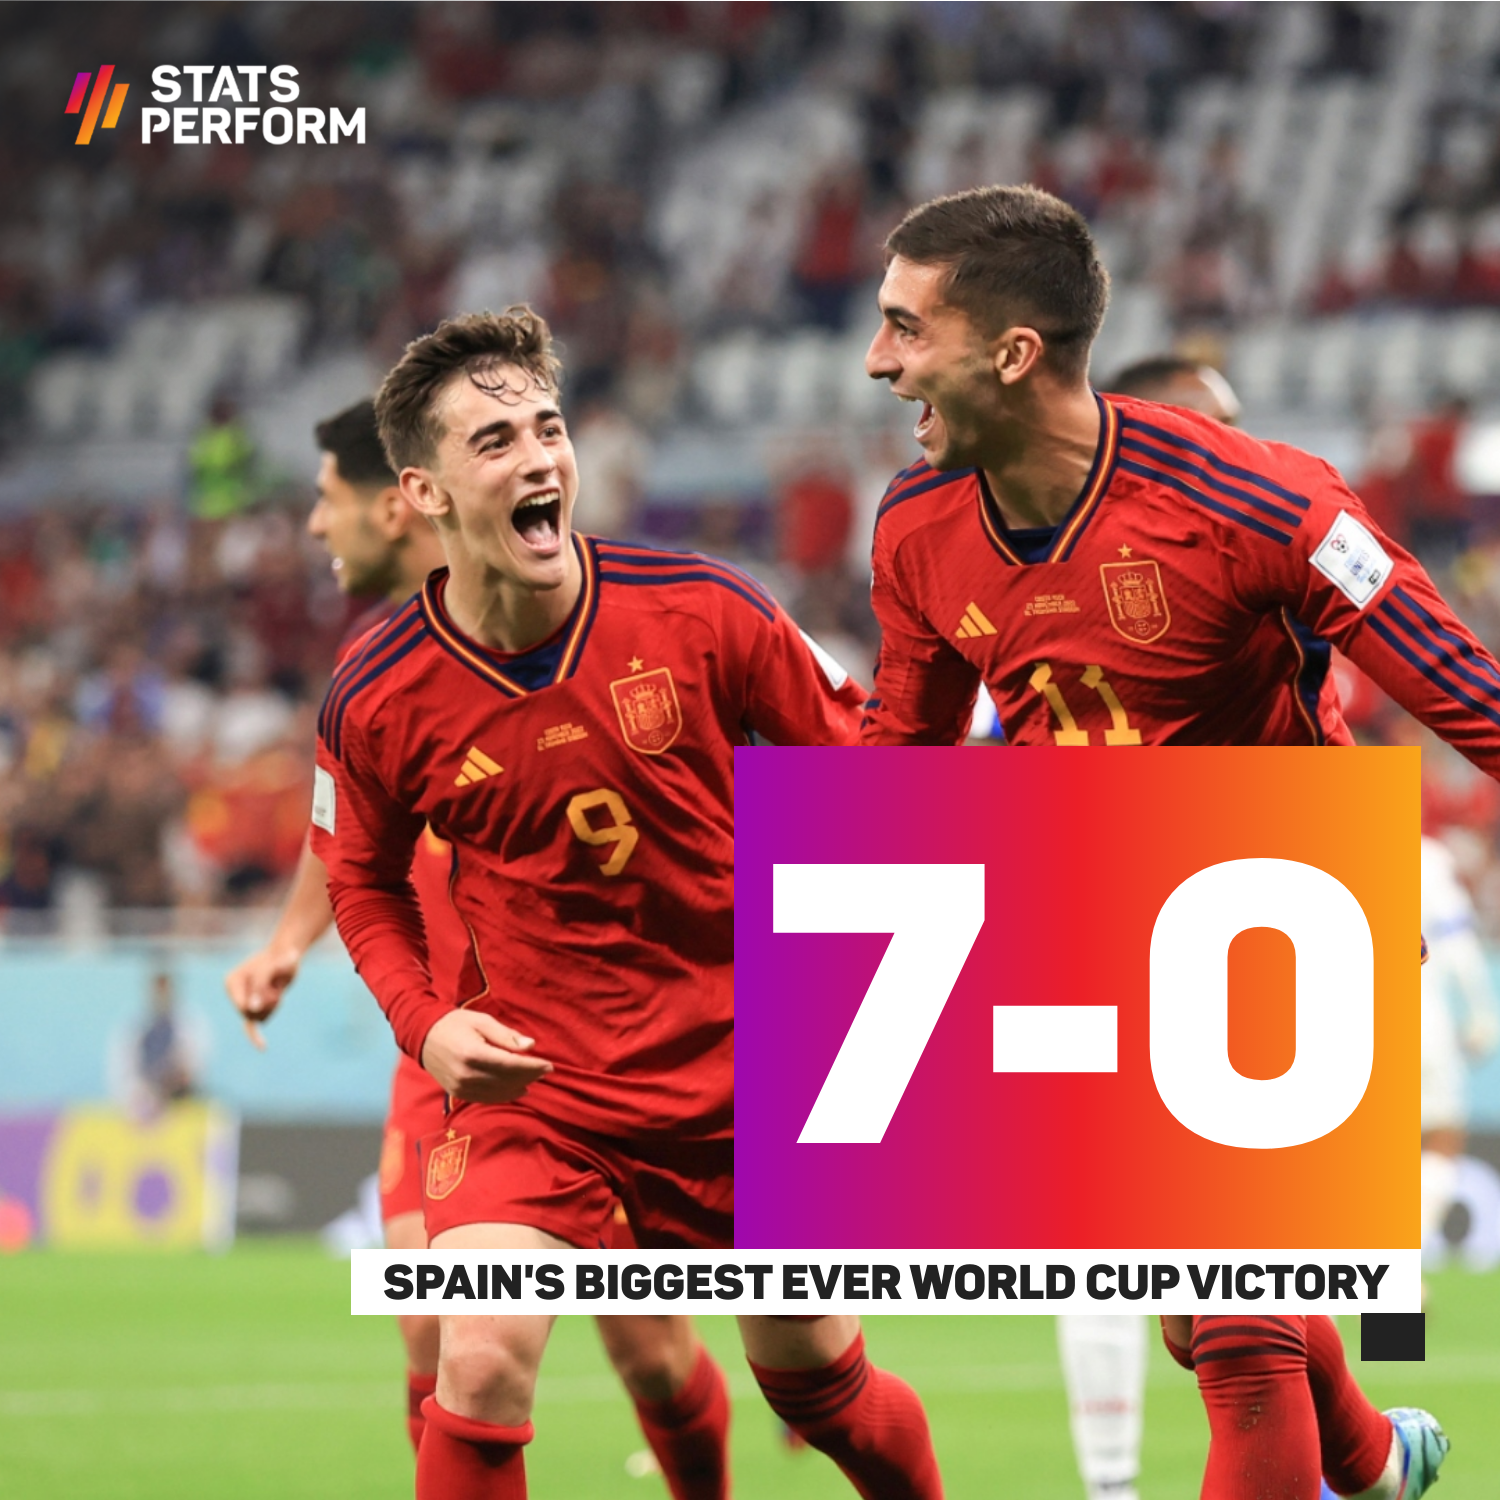 Spain's 7-0 win over Costa Rica was their biggest ever at the World Cup